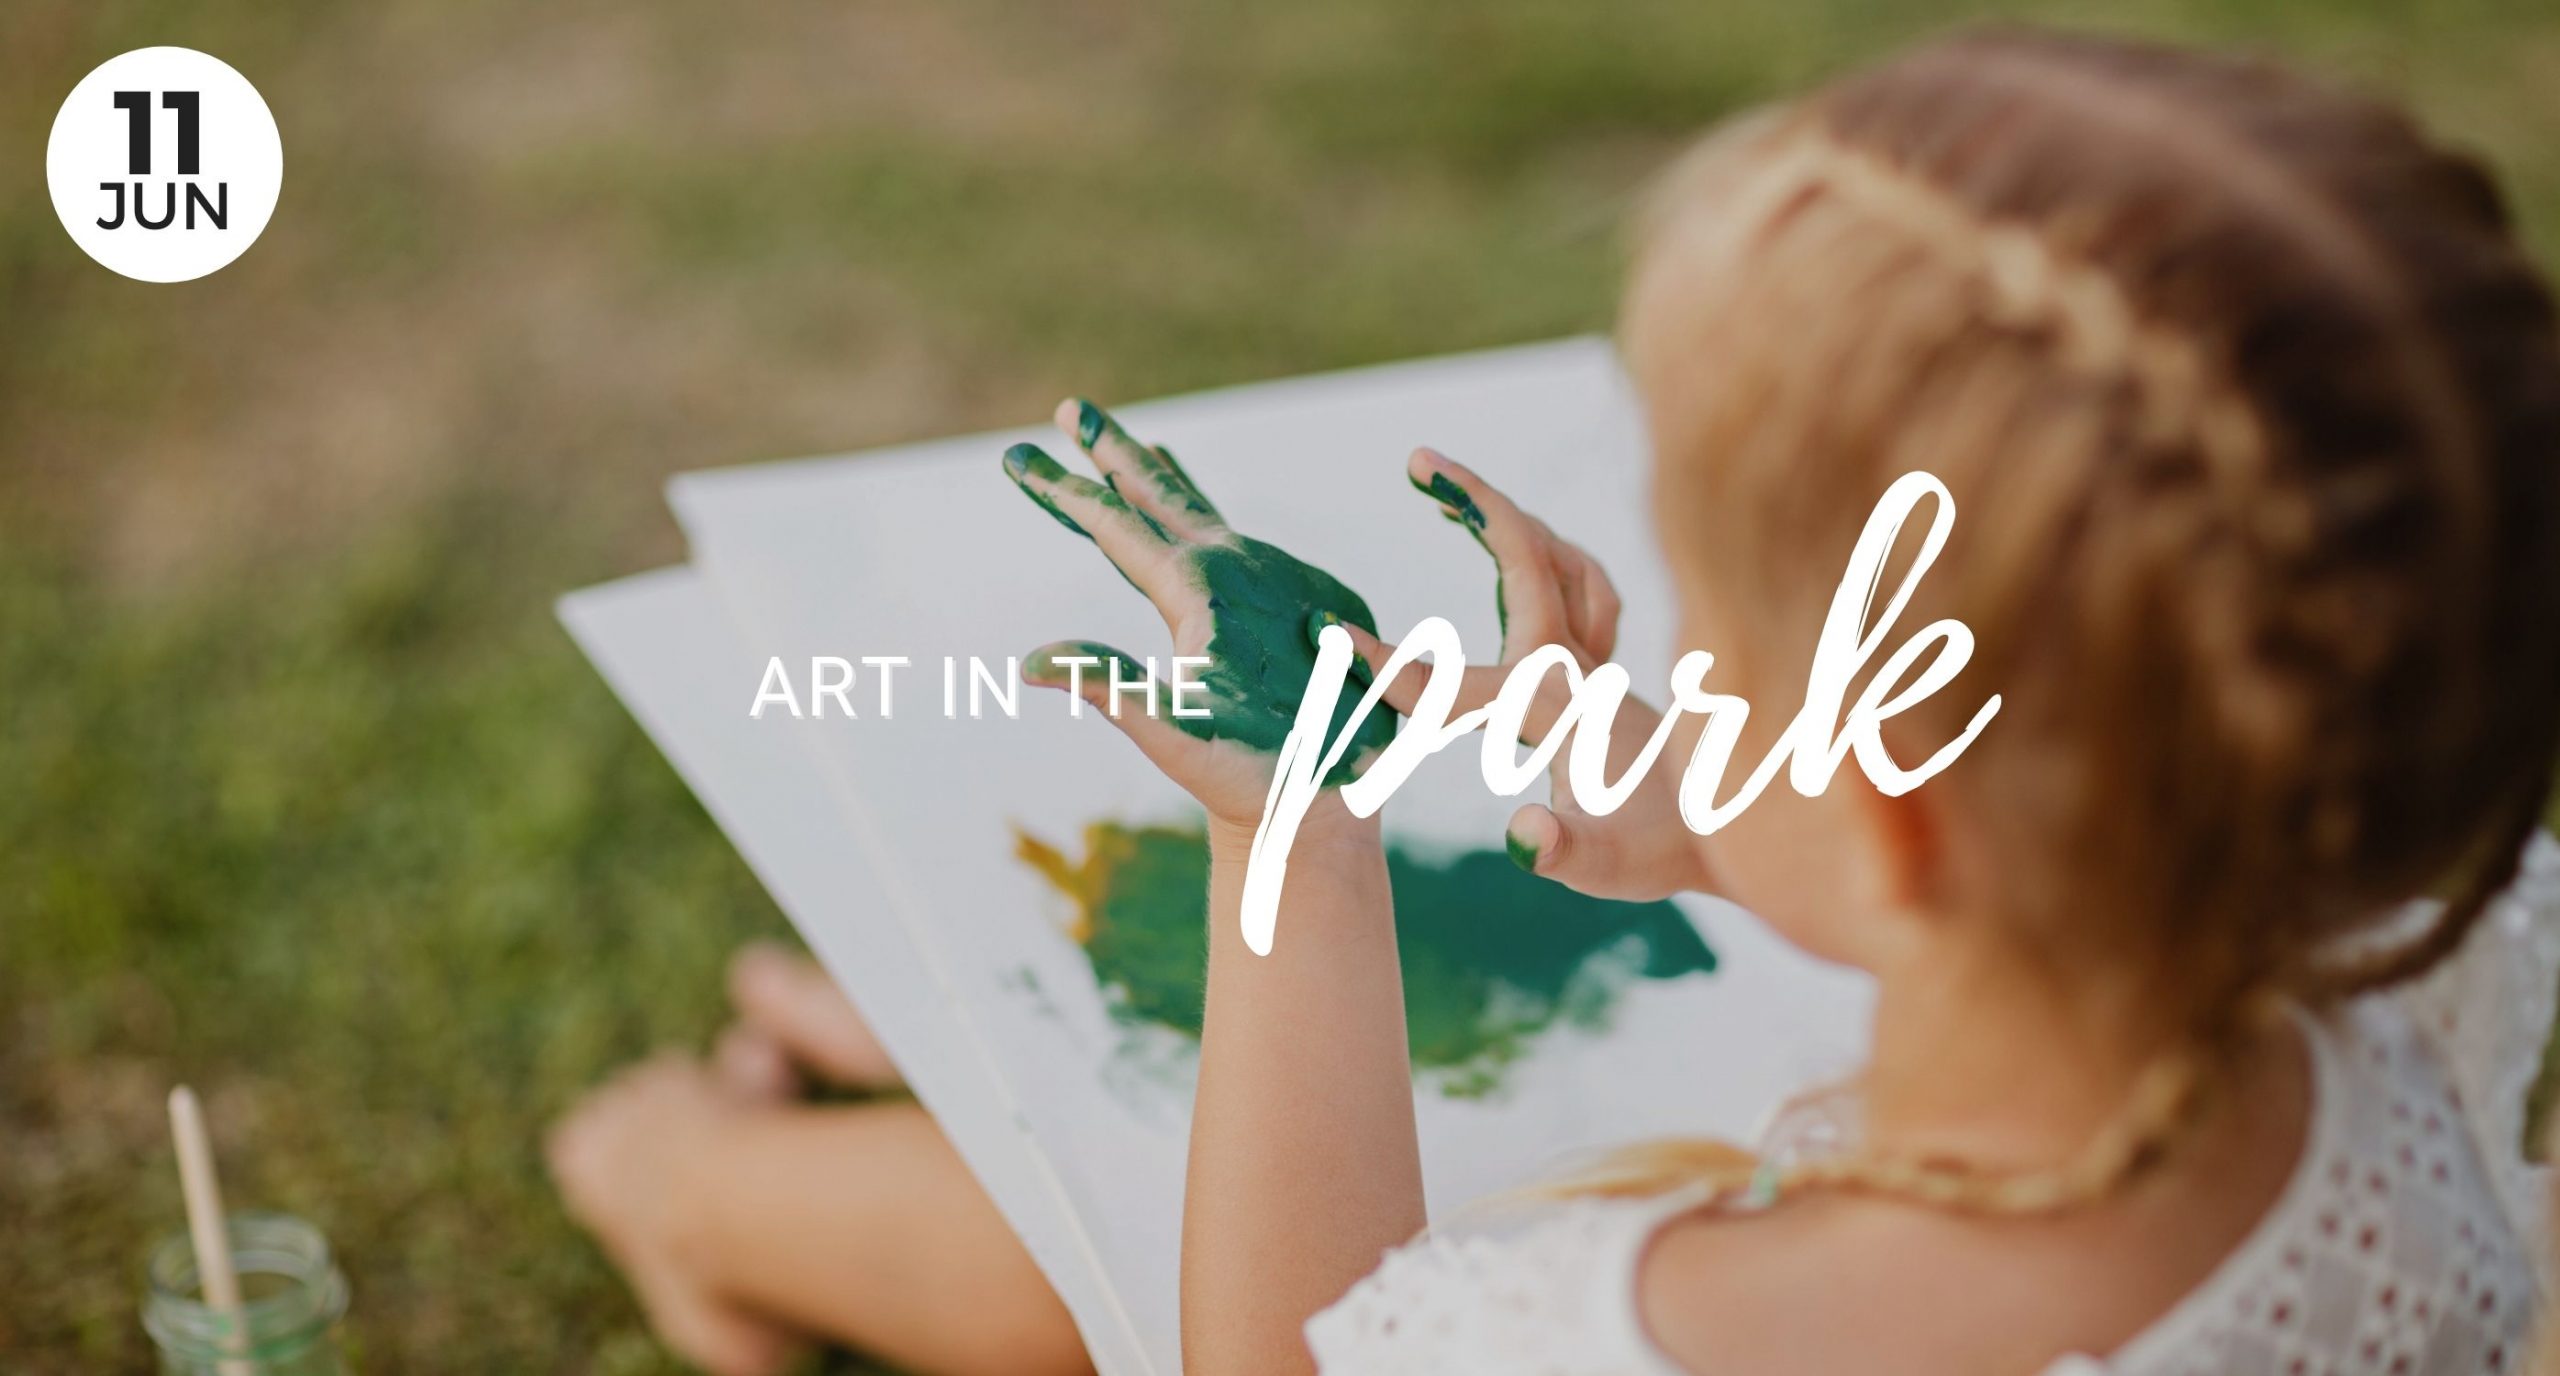 Art in the Park, Fort Casey, Coupeville, Washington, Whidbey Island, State Parks, Art, Artist, Outdoors, Events, Explore